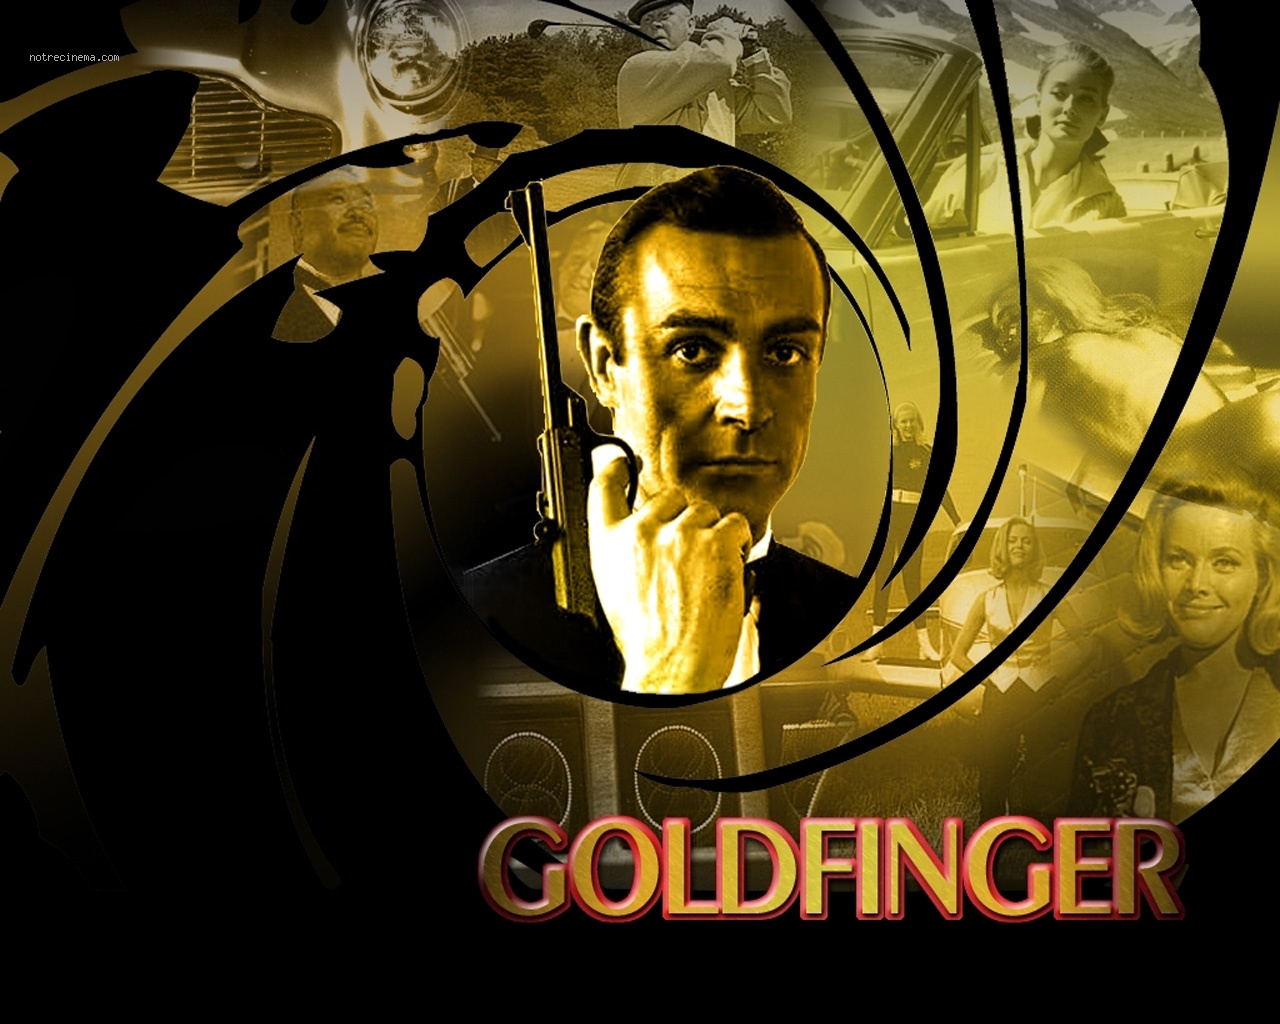 Images of Goldfinger | 1280x1024